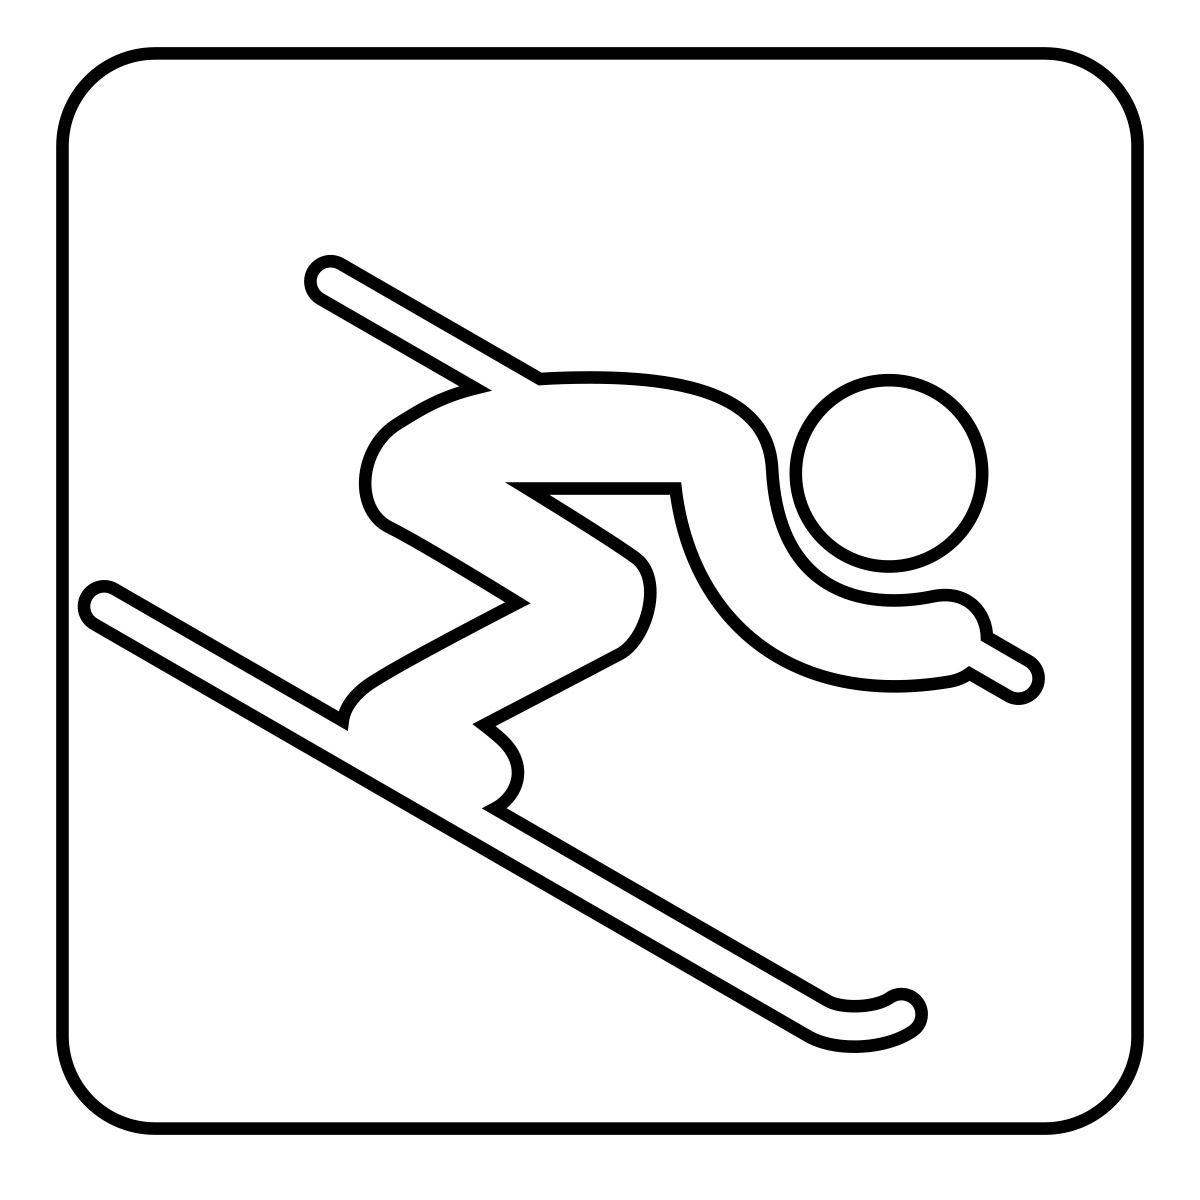 skis clipart black and white